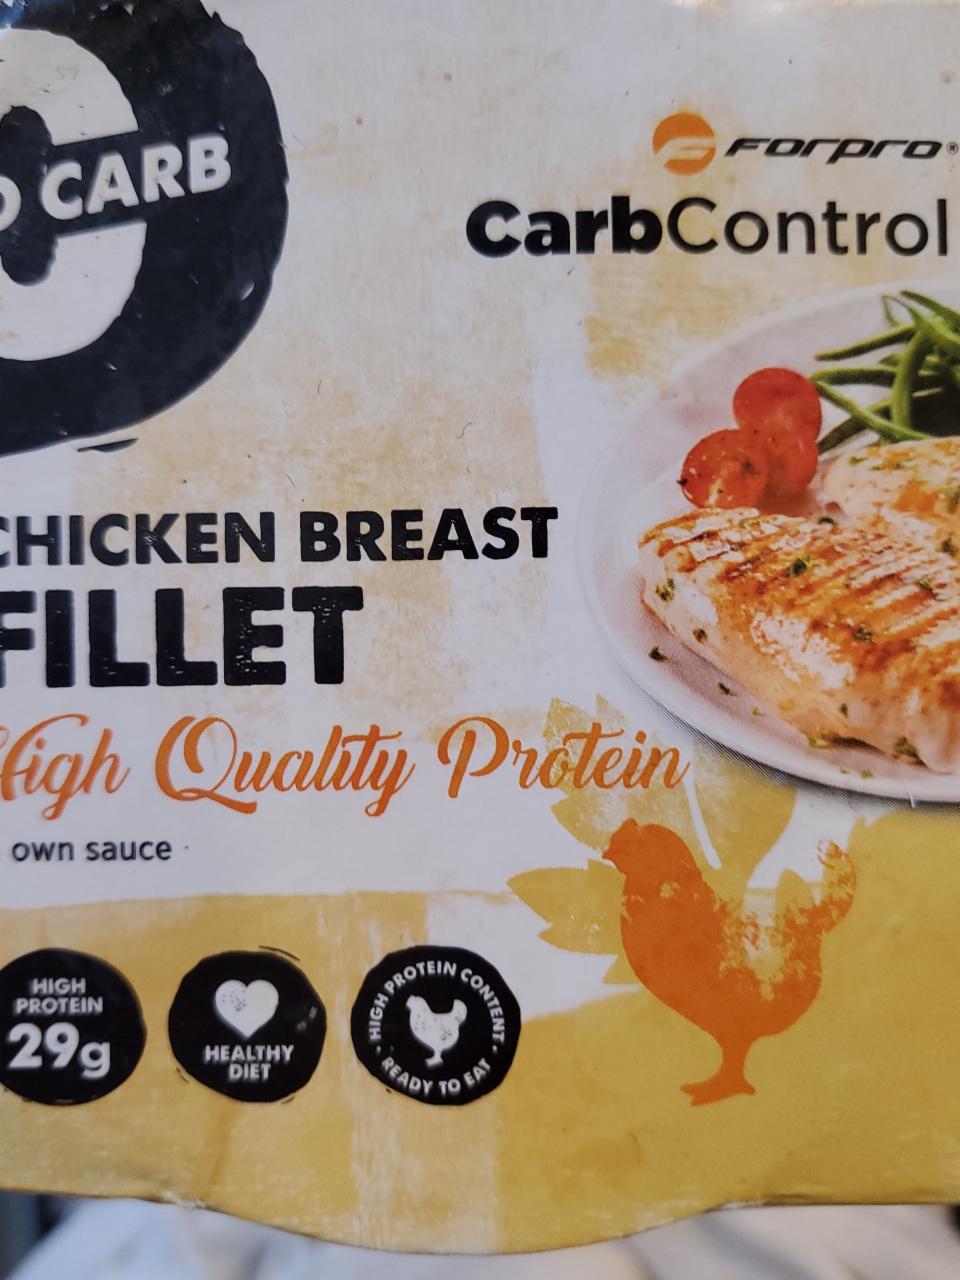 Fotografie - Carb Control Chicken Breast Fillet in own sauce Forpro